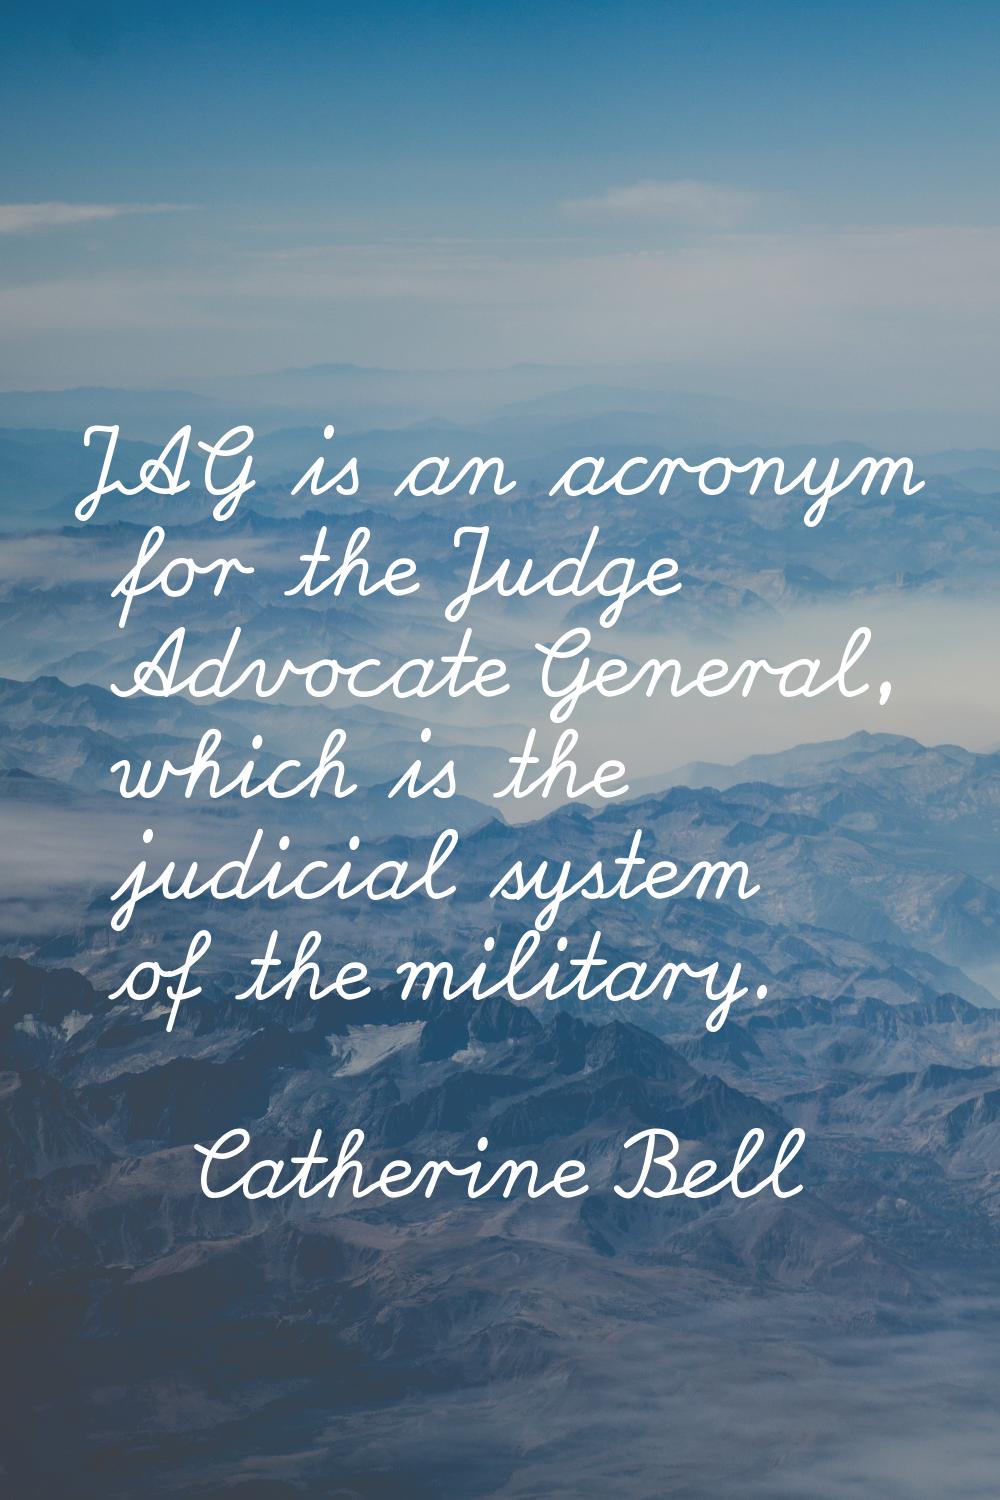 JAG is an acronym for the Judge Advocate General, which is the judicial system of the military.